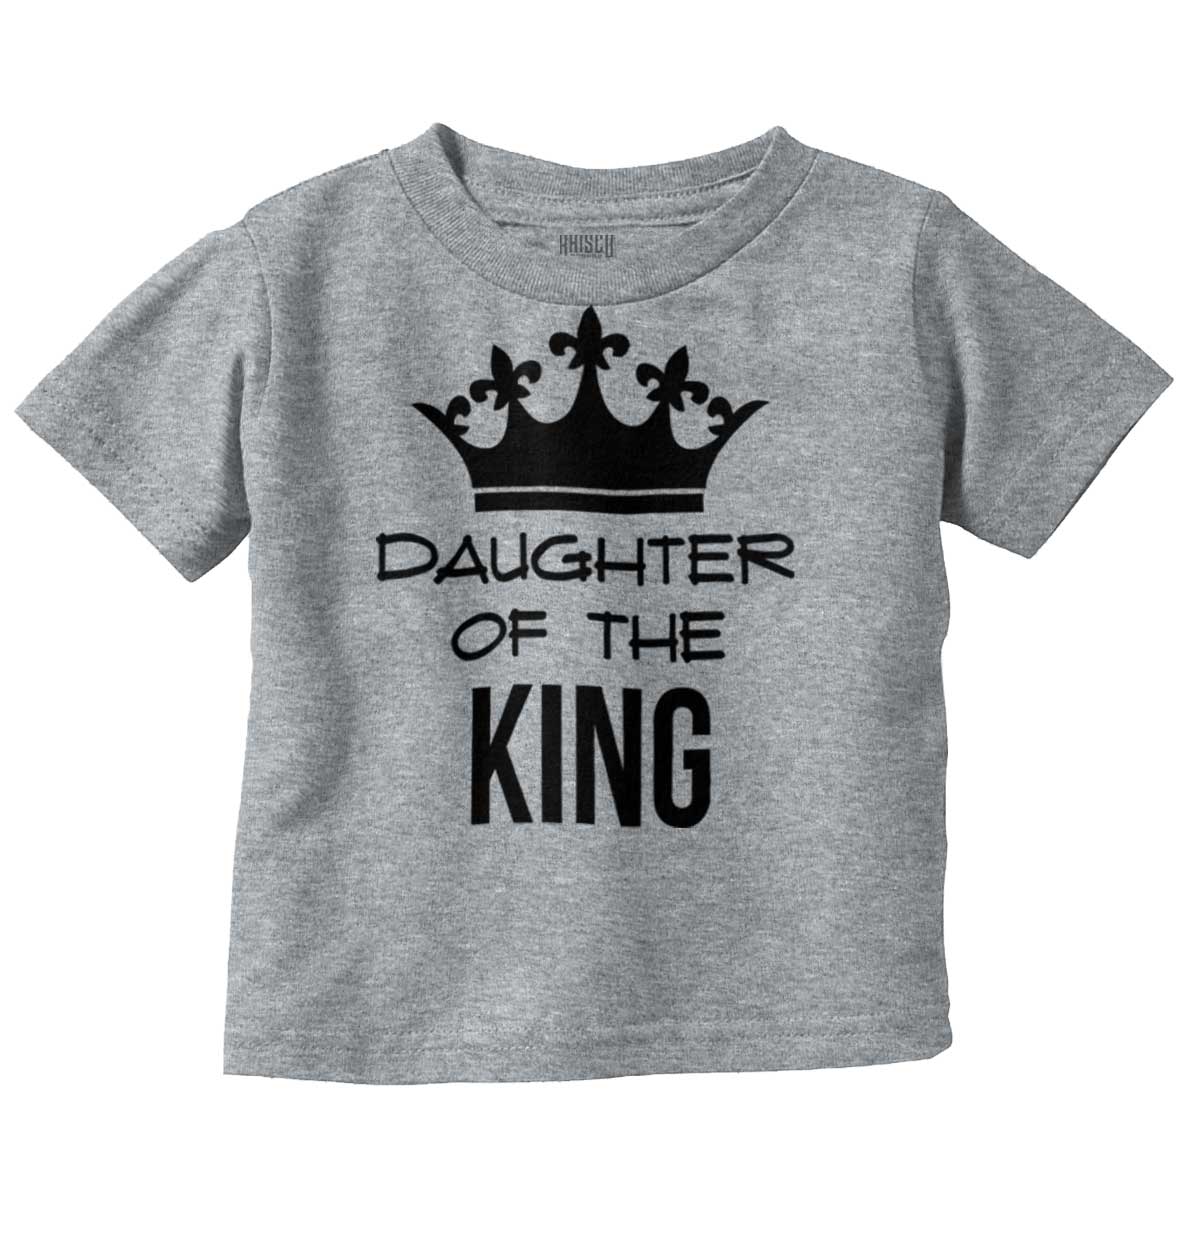 Daughter of the King Infant Toddler T-Shirt | Brisco Baby